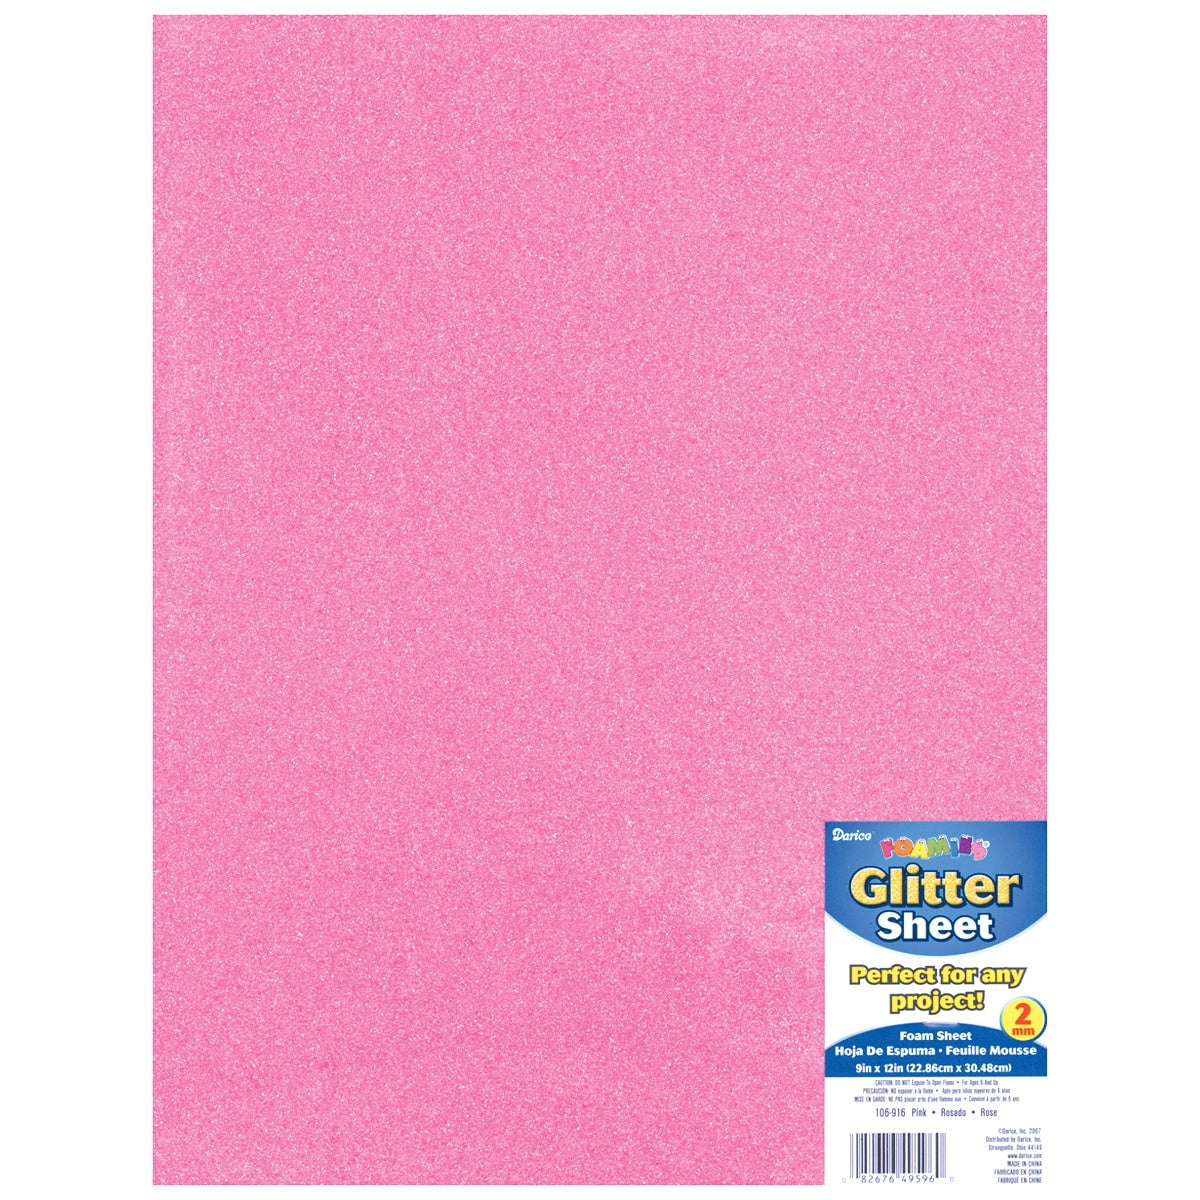 DMiotech 6 Pack 10.83 x 8.46 Inch 2mm Thick EVA Foam Sheets for Arts and  Crafts Craft Foam Sheets Light Pink Glitter